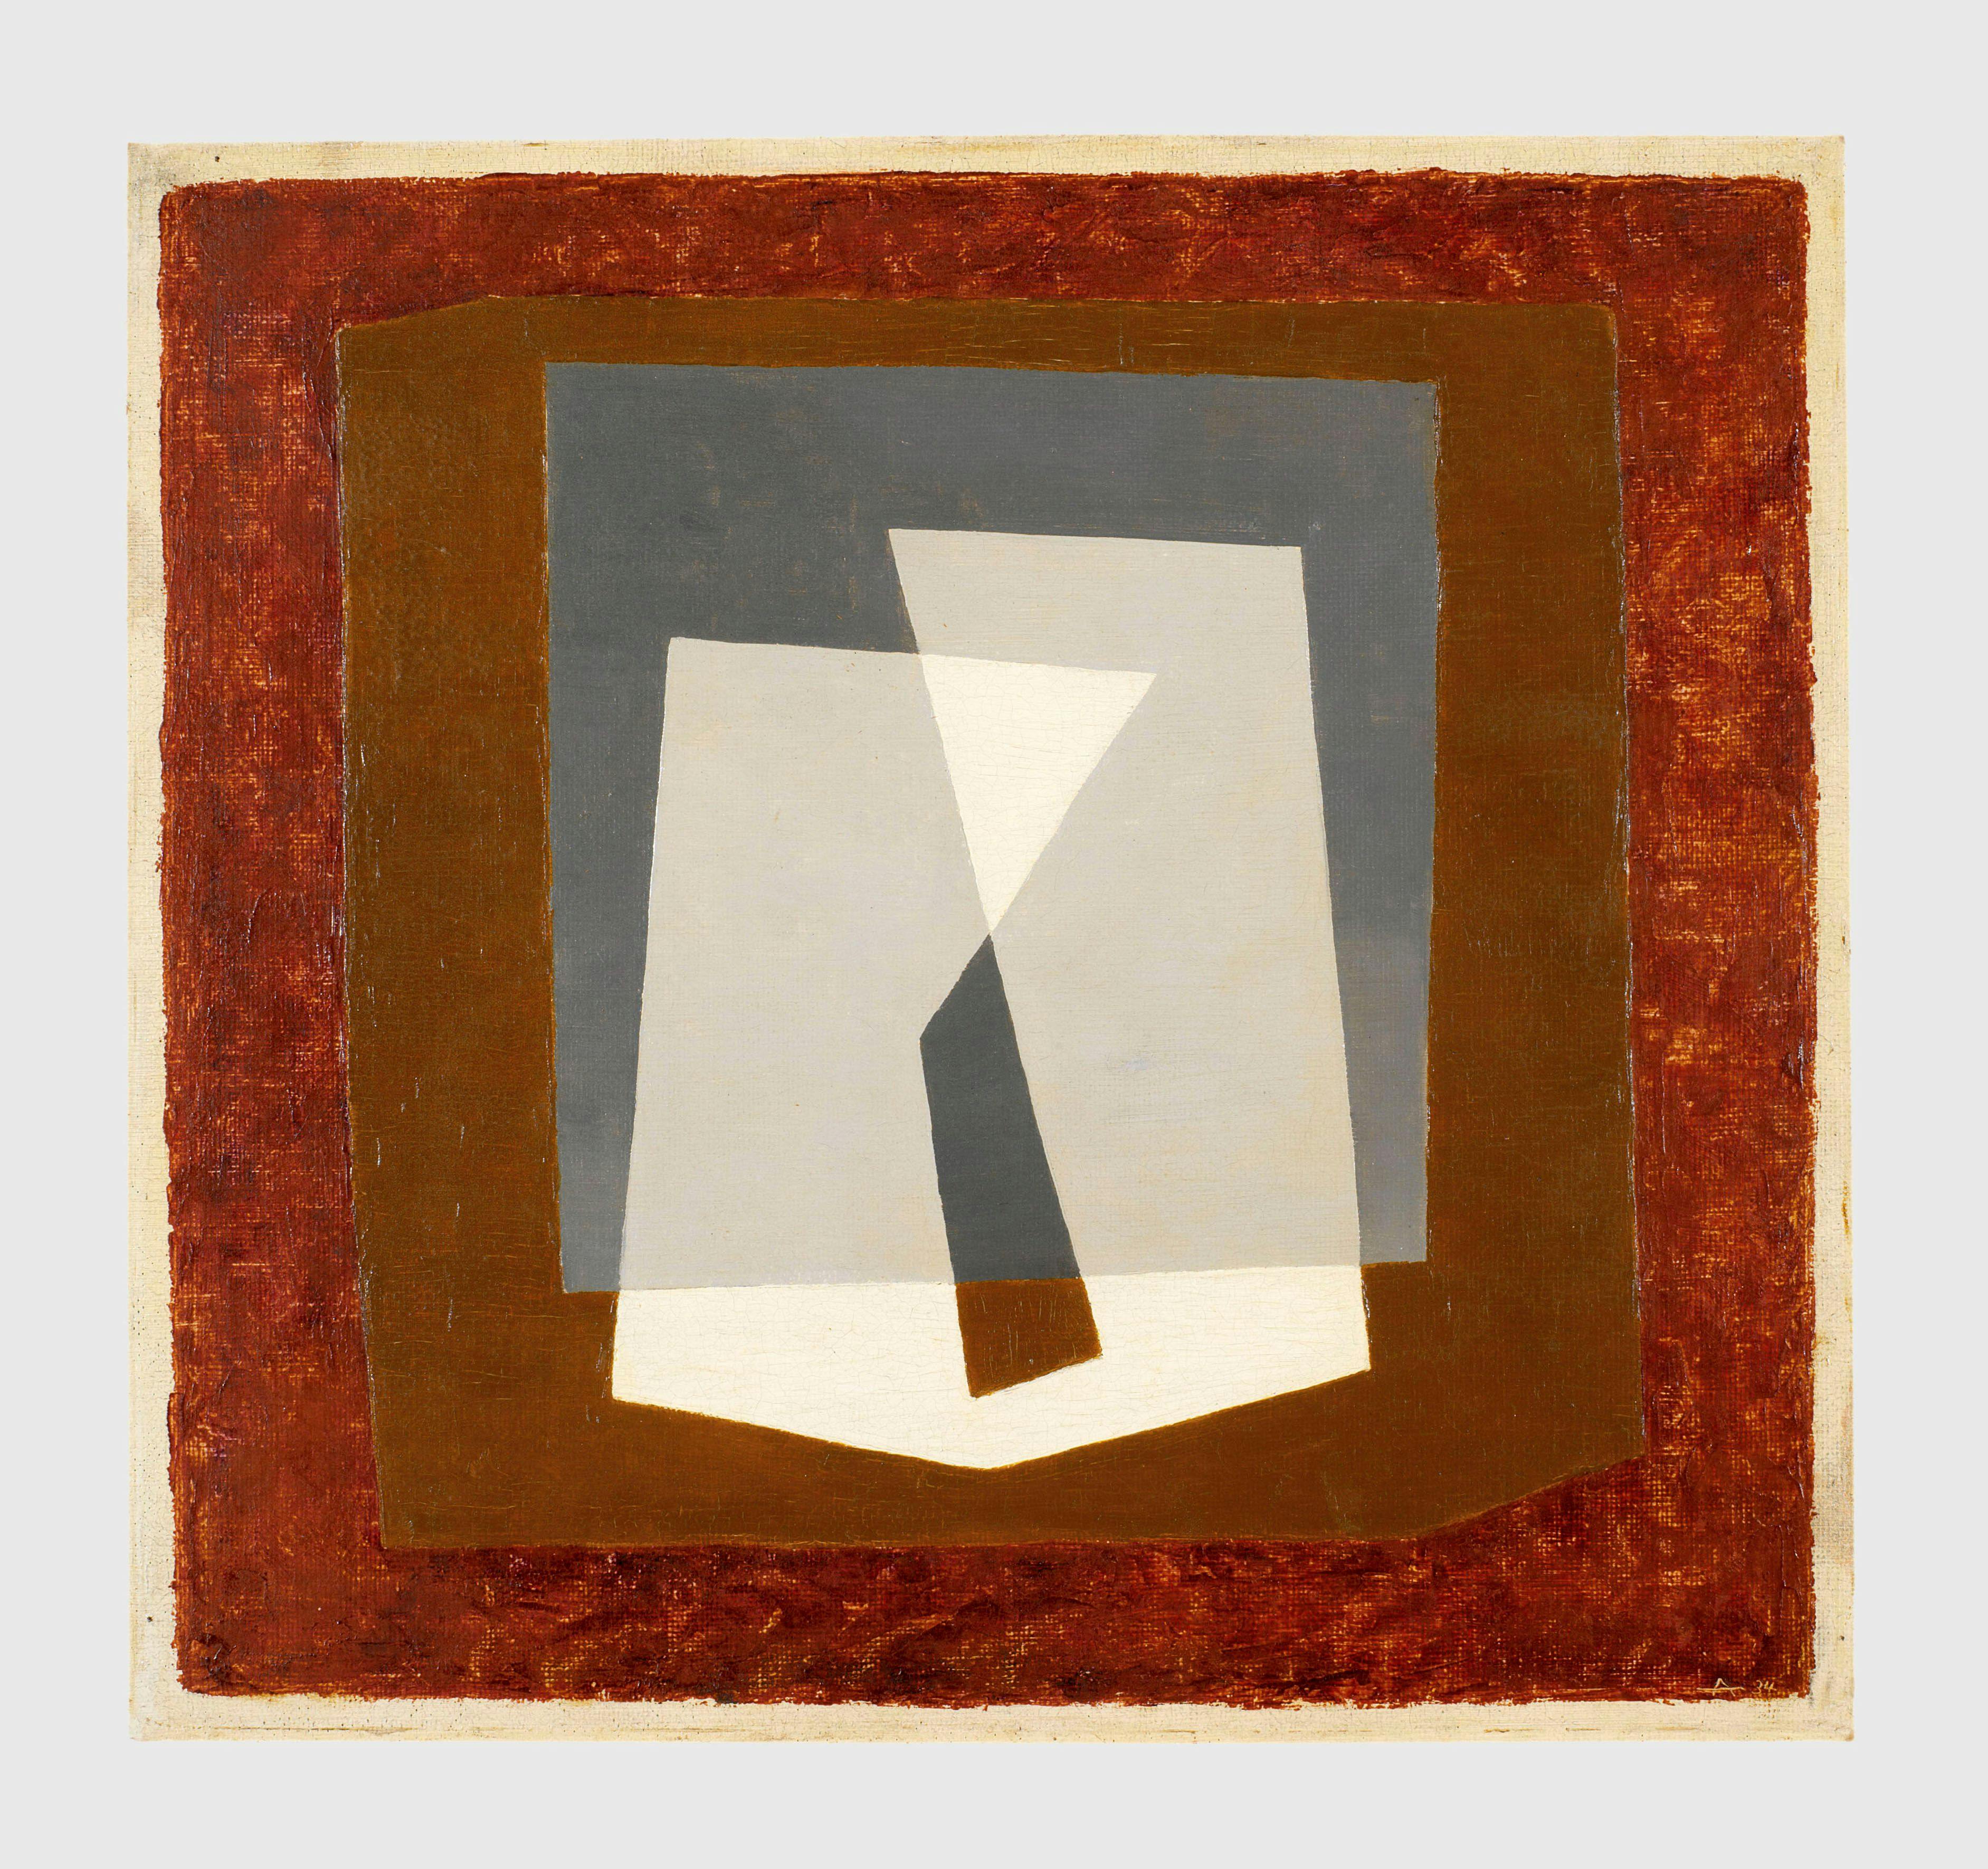 A painting by Josef Albers, titled Meeting B, dated 1934.